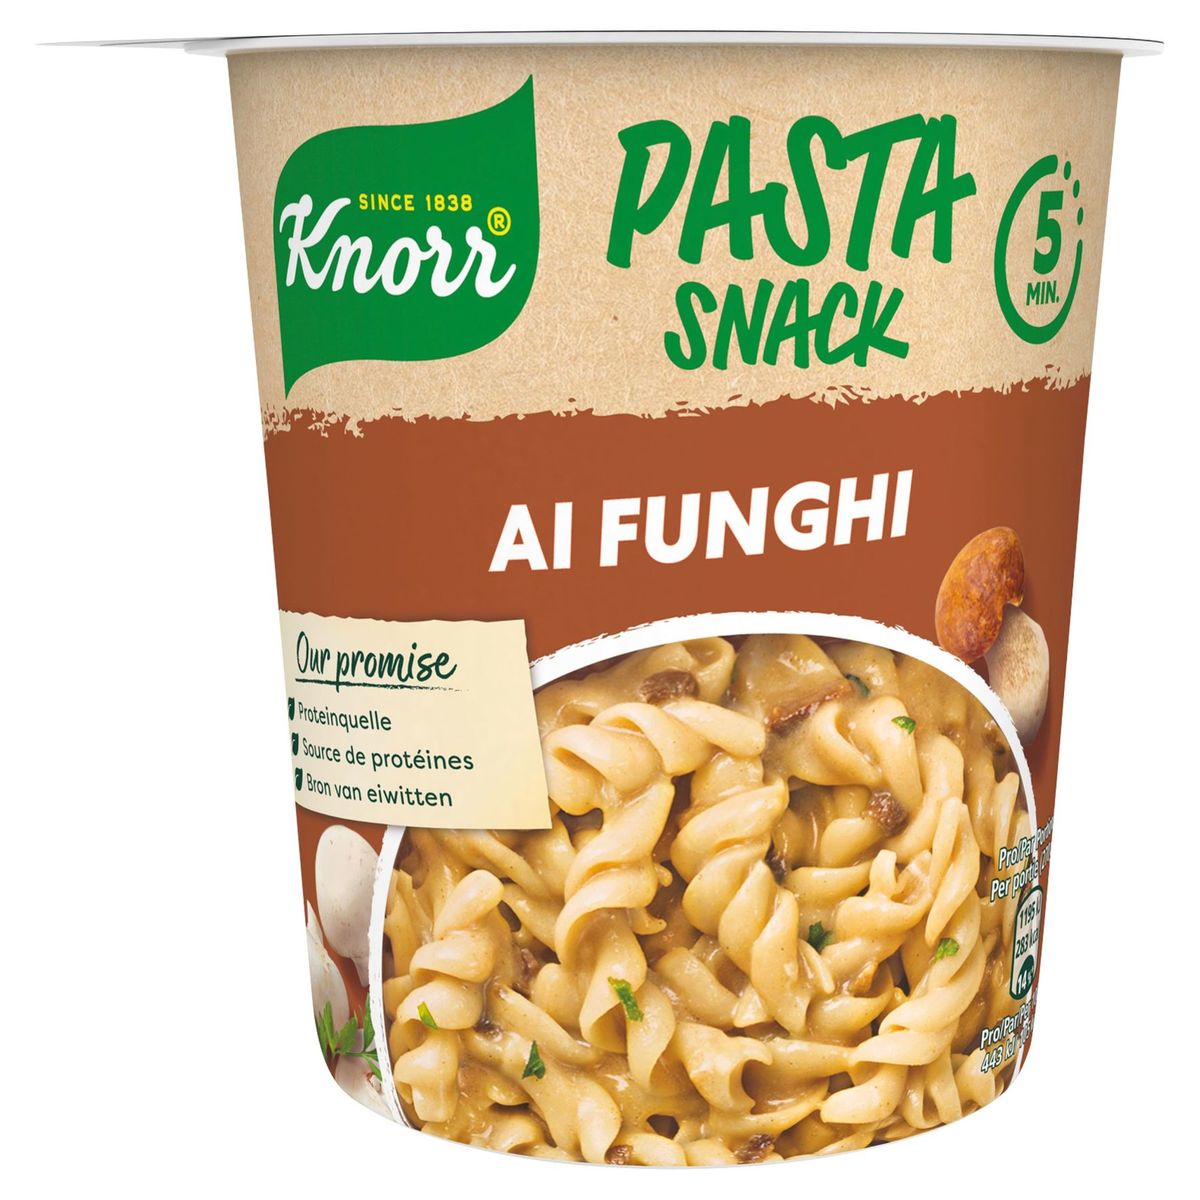 Knorr Instantanée Snack Funghi 70 g